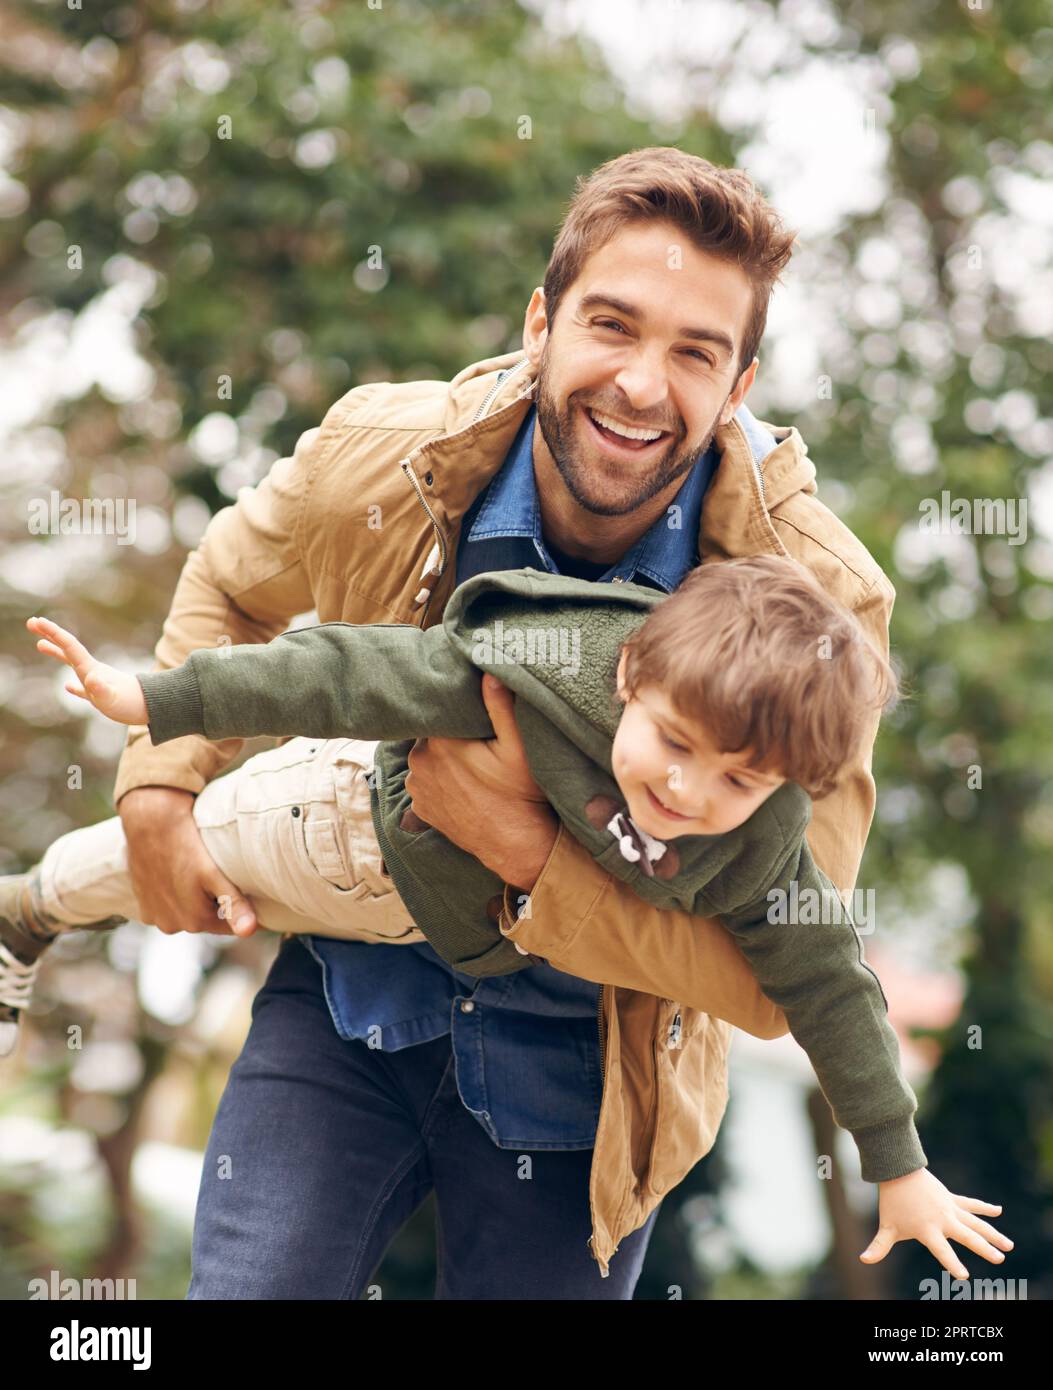 Hes my dad and best friend. a father and son enjoying a day outdoors. Stock Photo